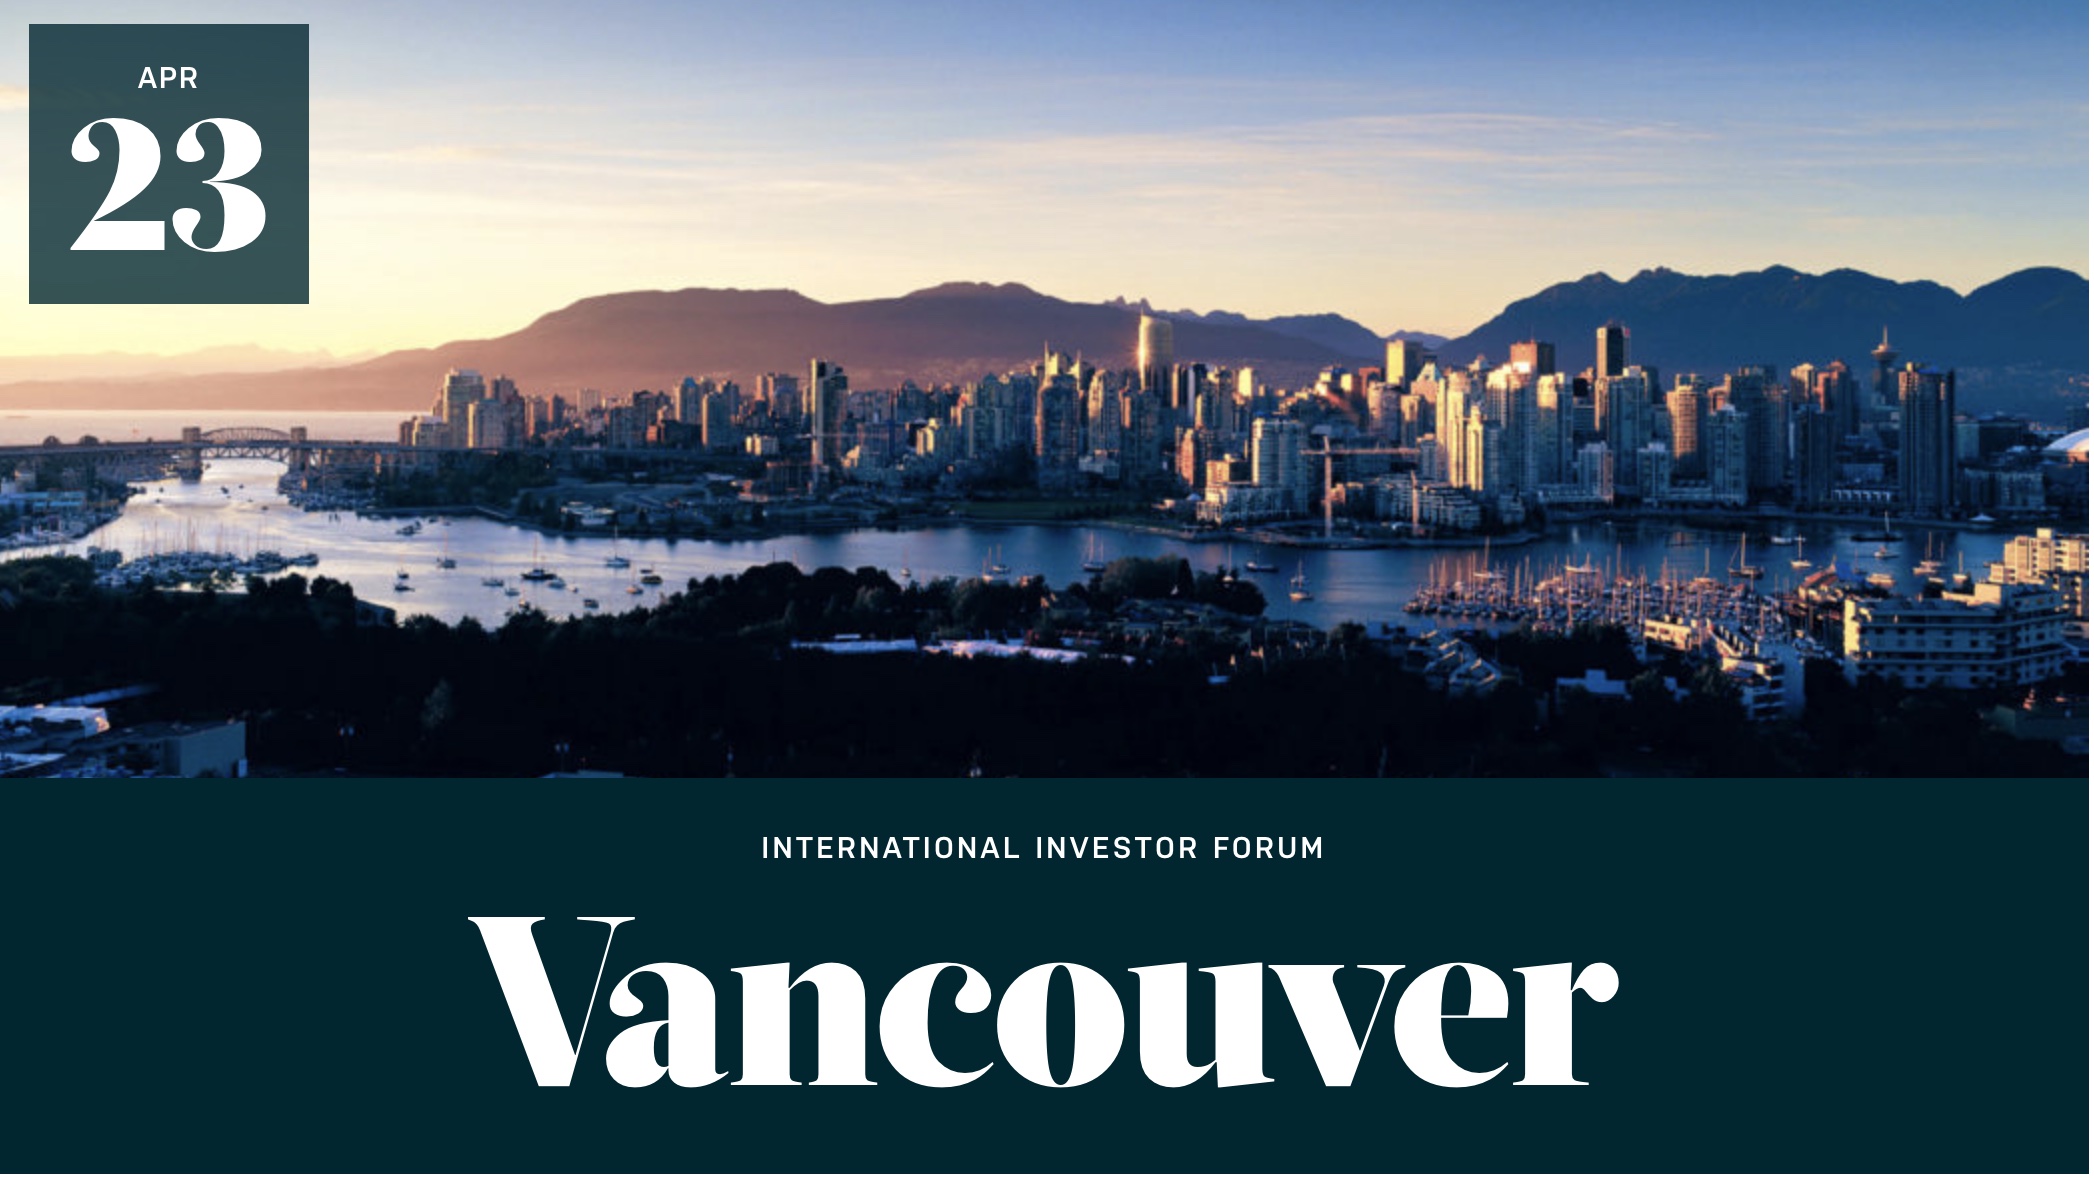 MjLink.com to Present at the Arcview Investor Forum in Vancouver, April 23-25, 2019